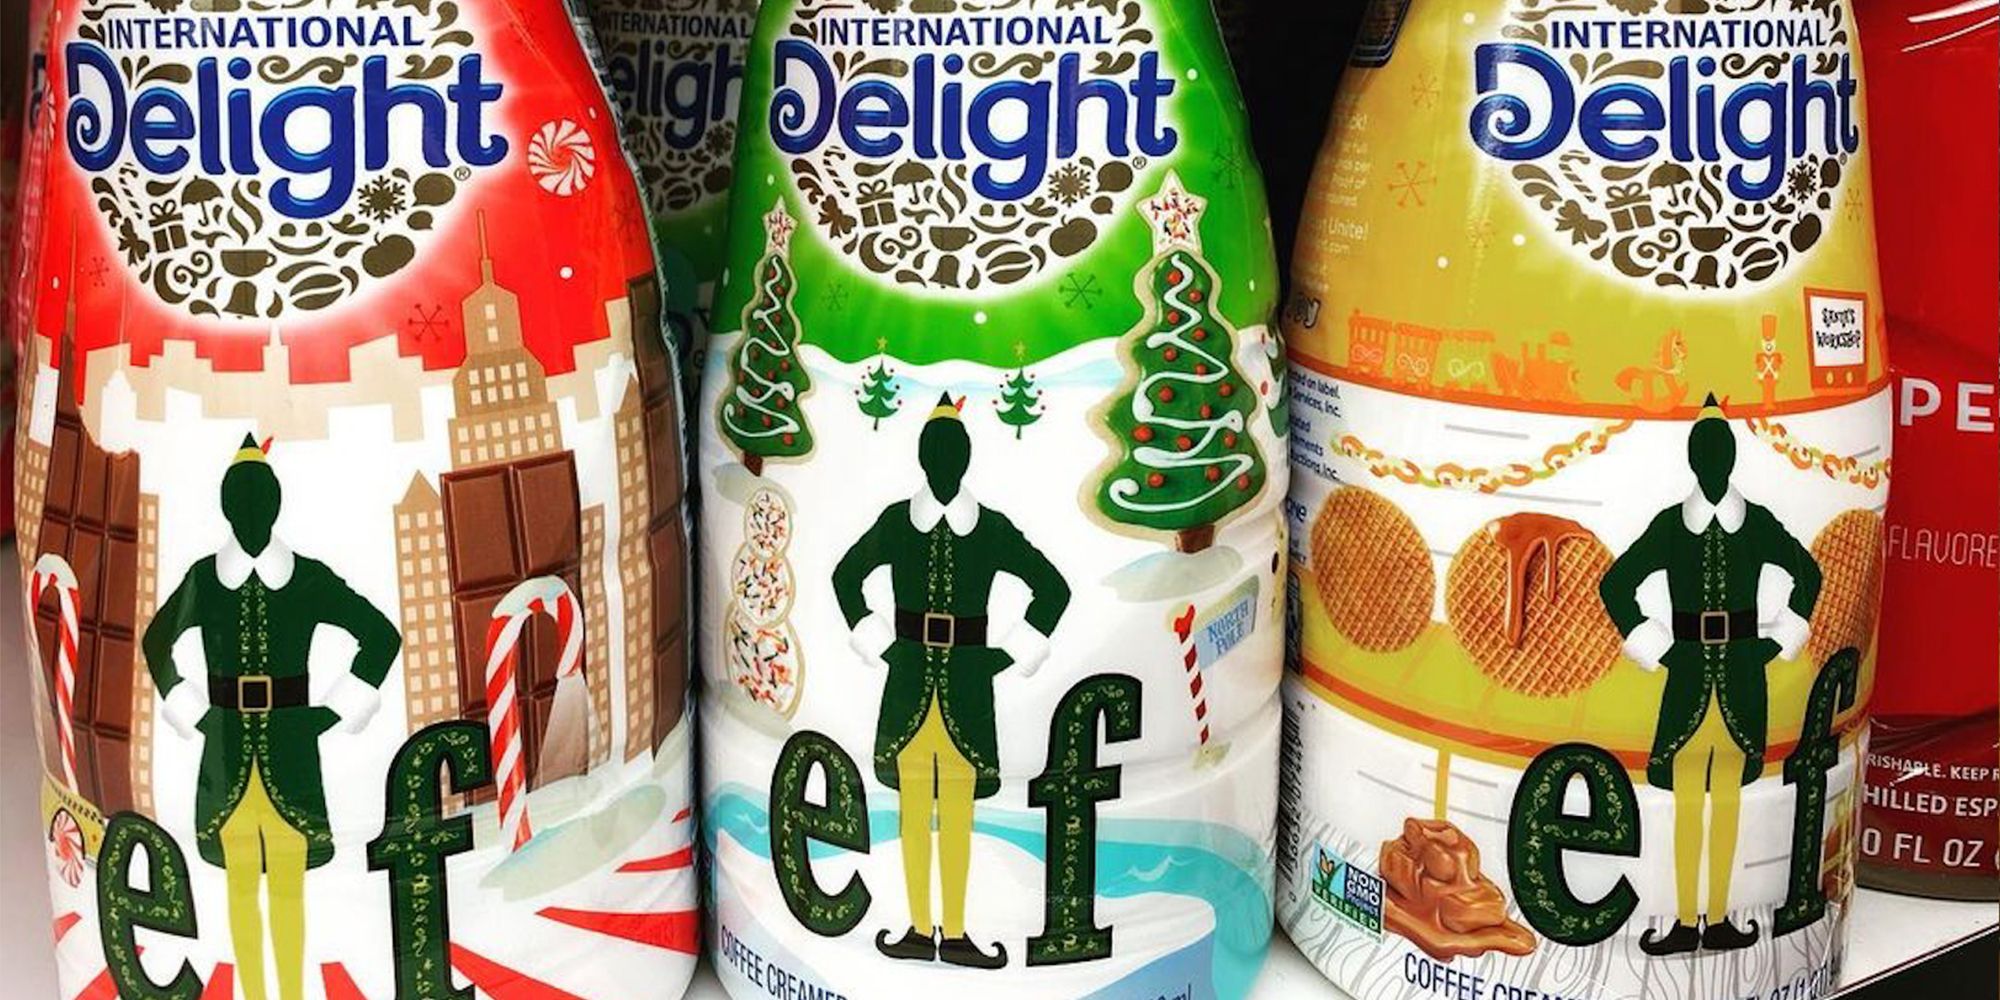 International Delight Launches 'Friends'-Themed Creamer